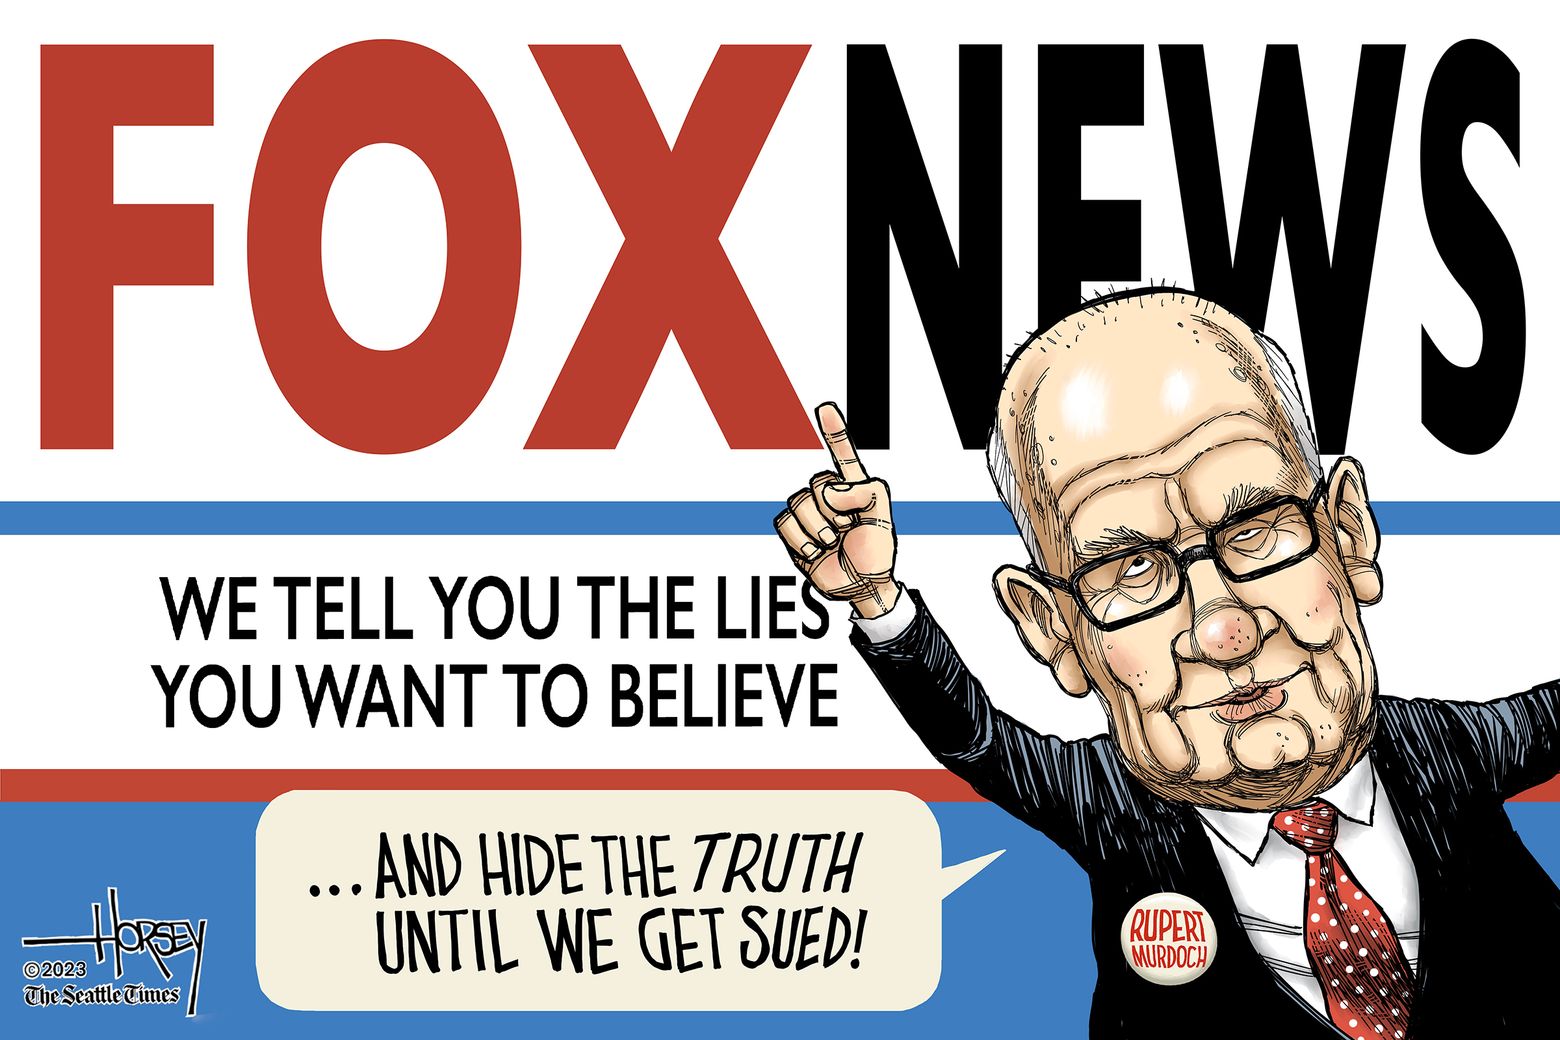 Fox News spins lies in the service of greed | The Seattle Times